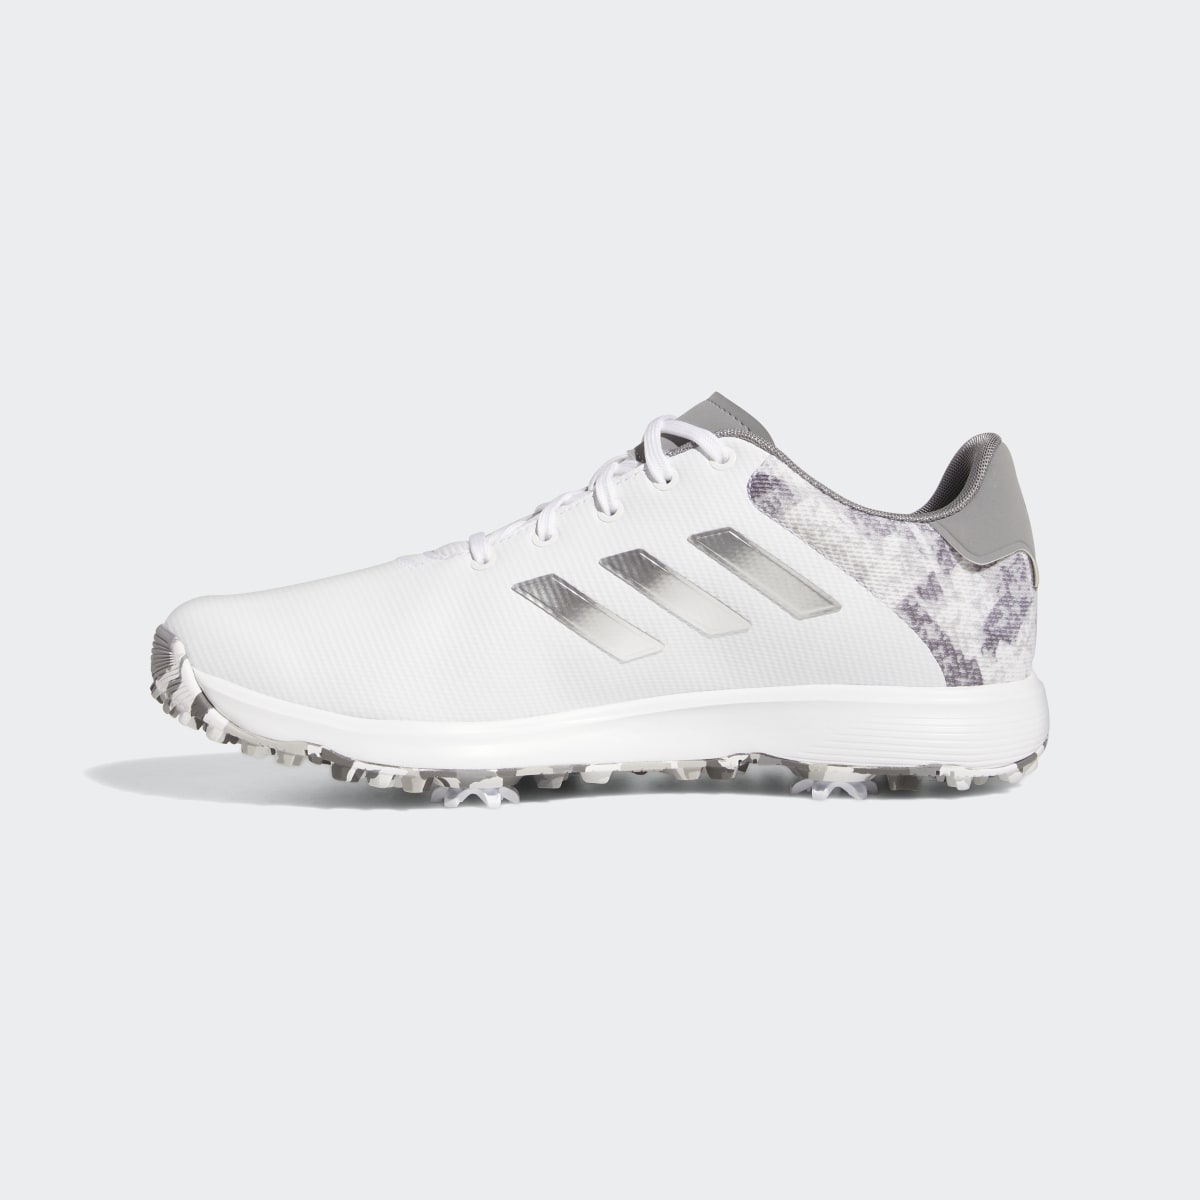 Adidas S2G Golf Shoes. 6